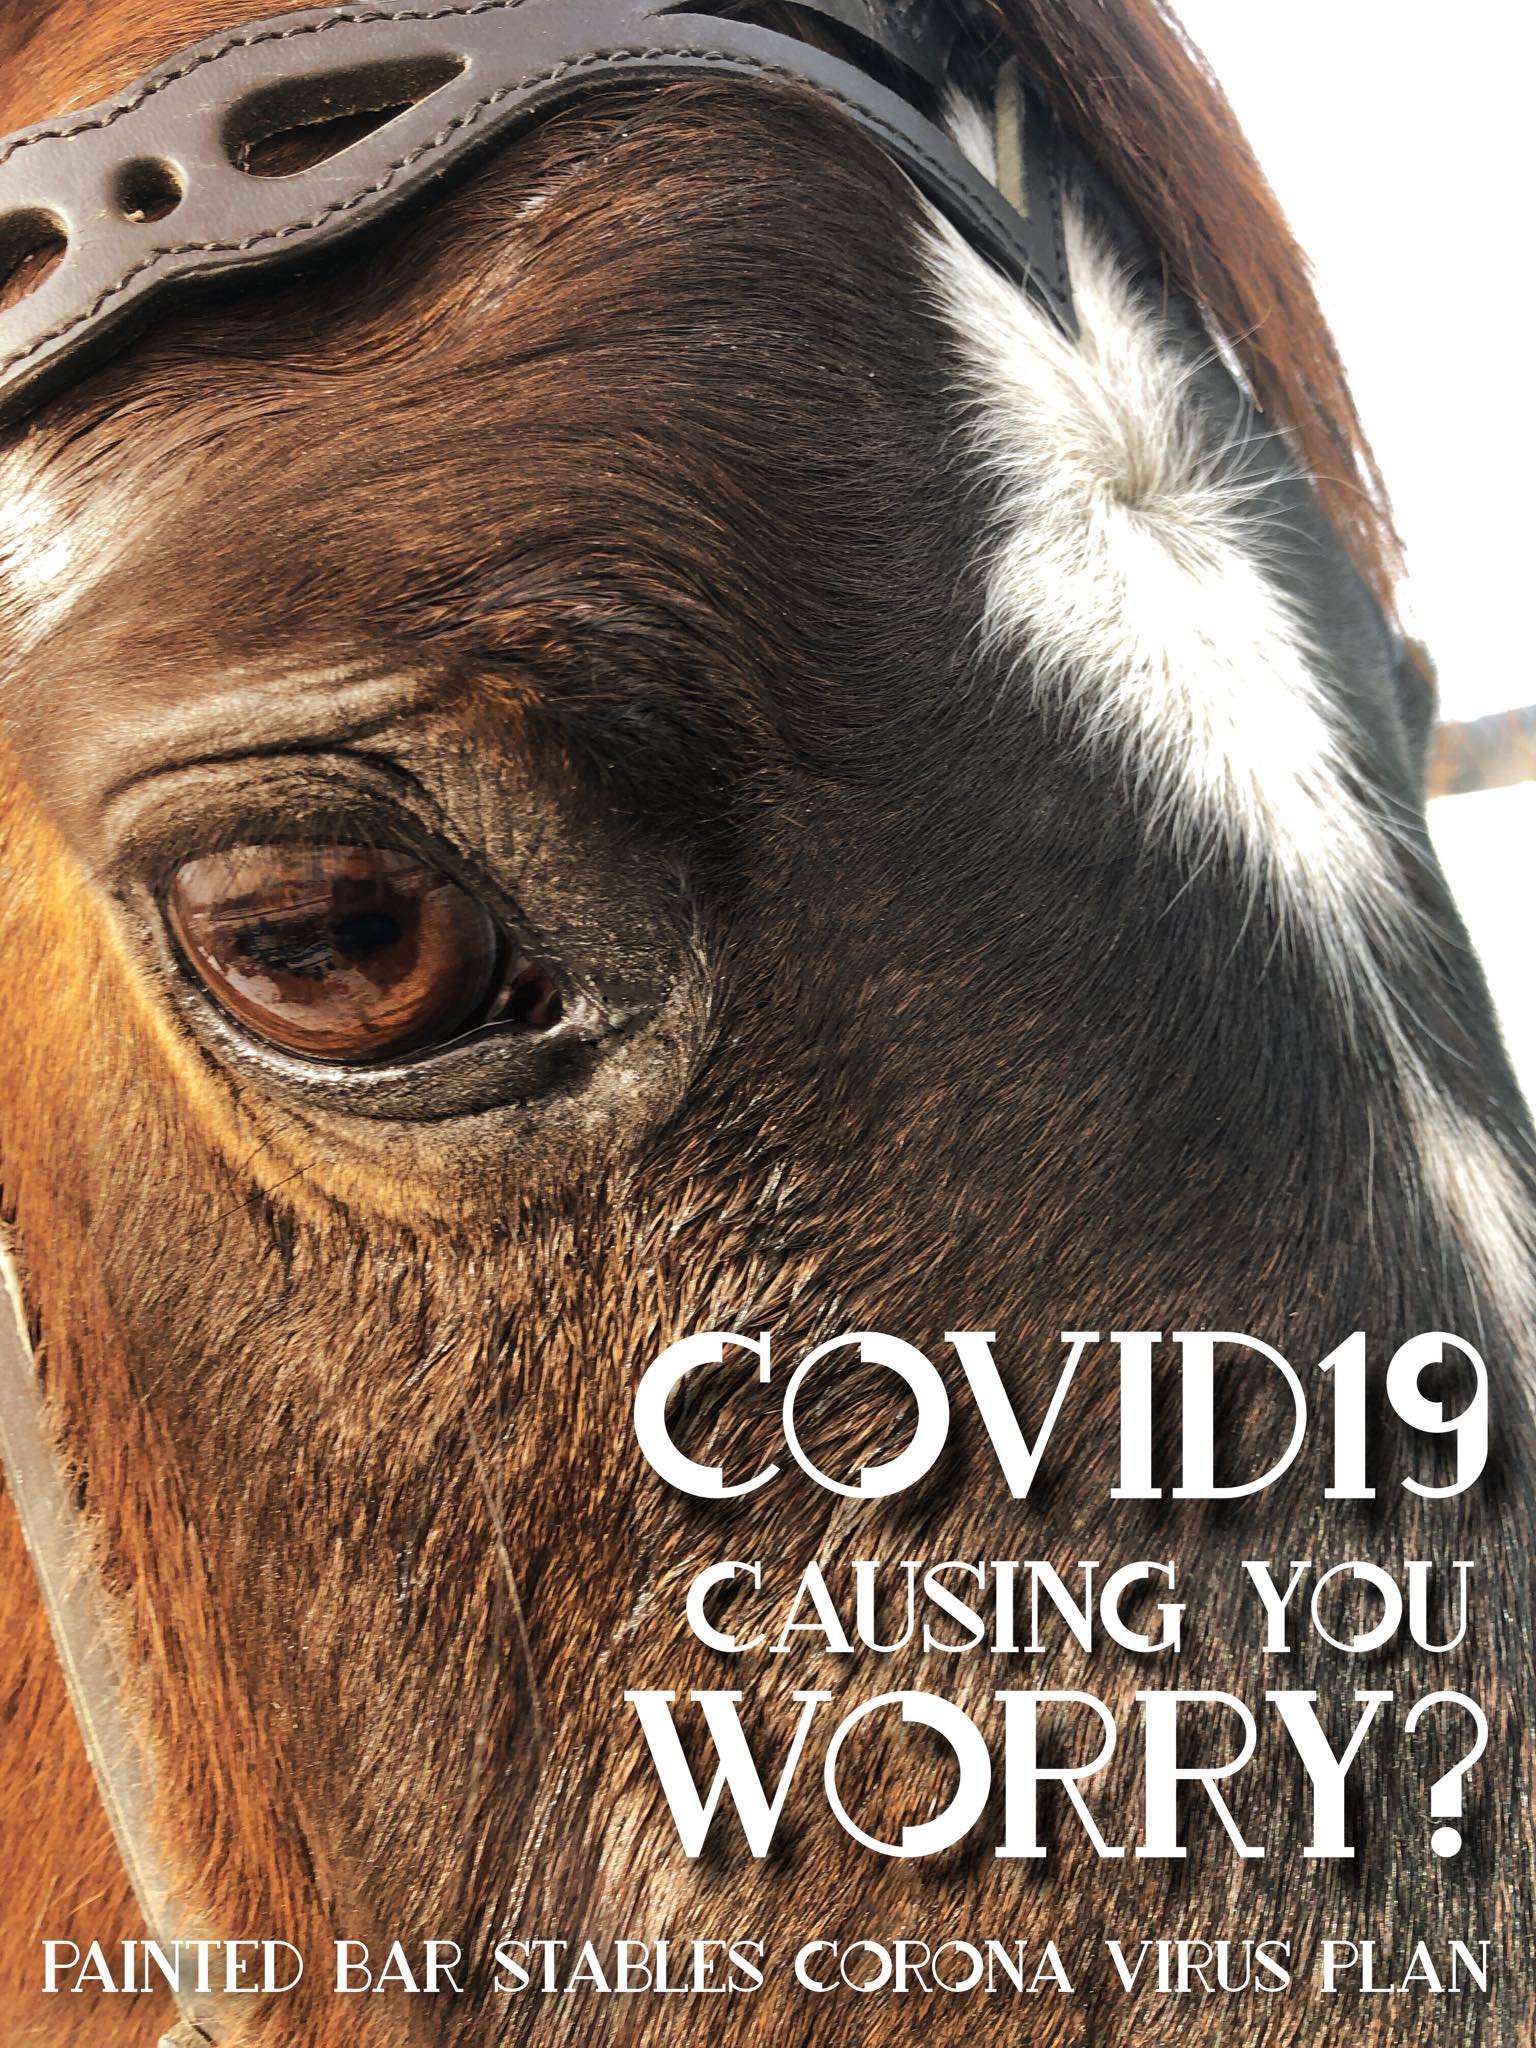 Are you worried about COVID19?